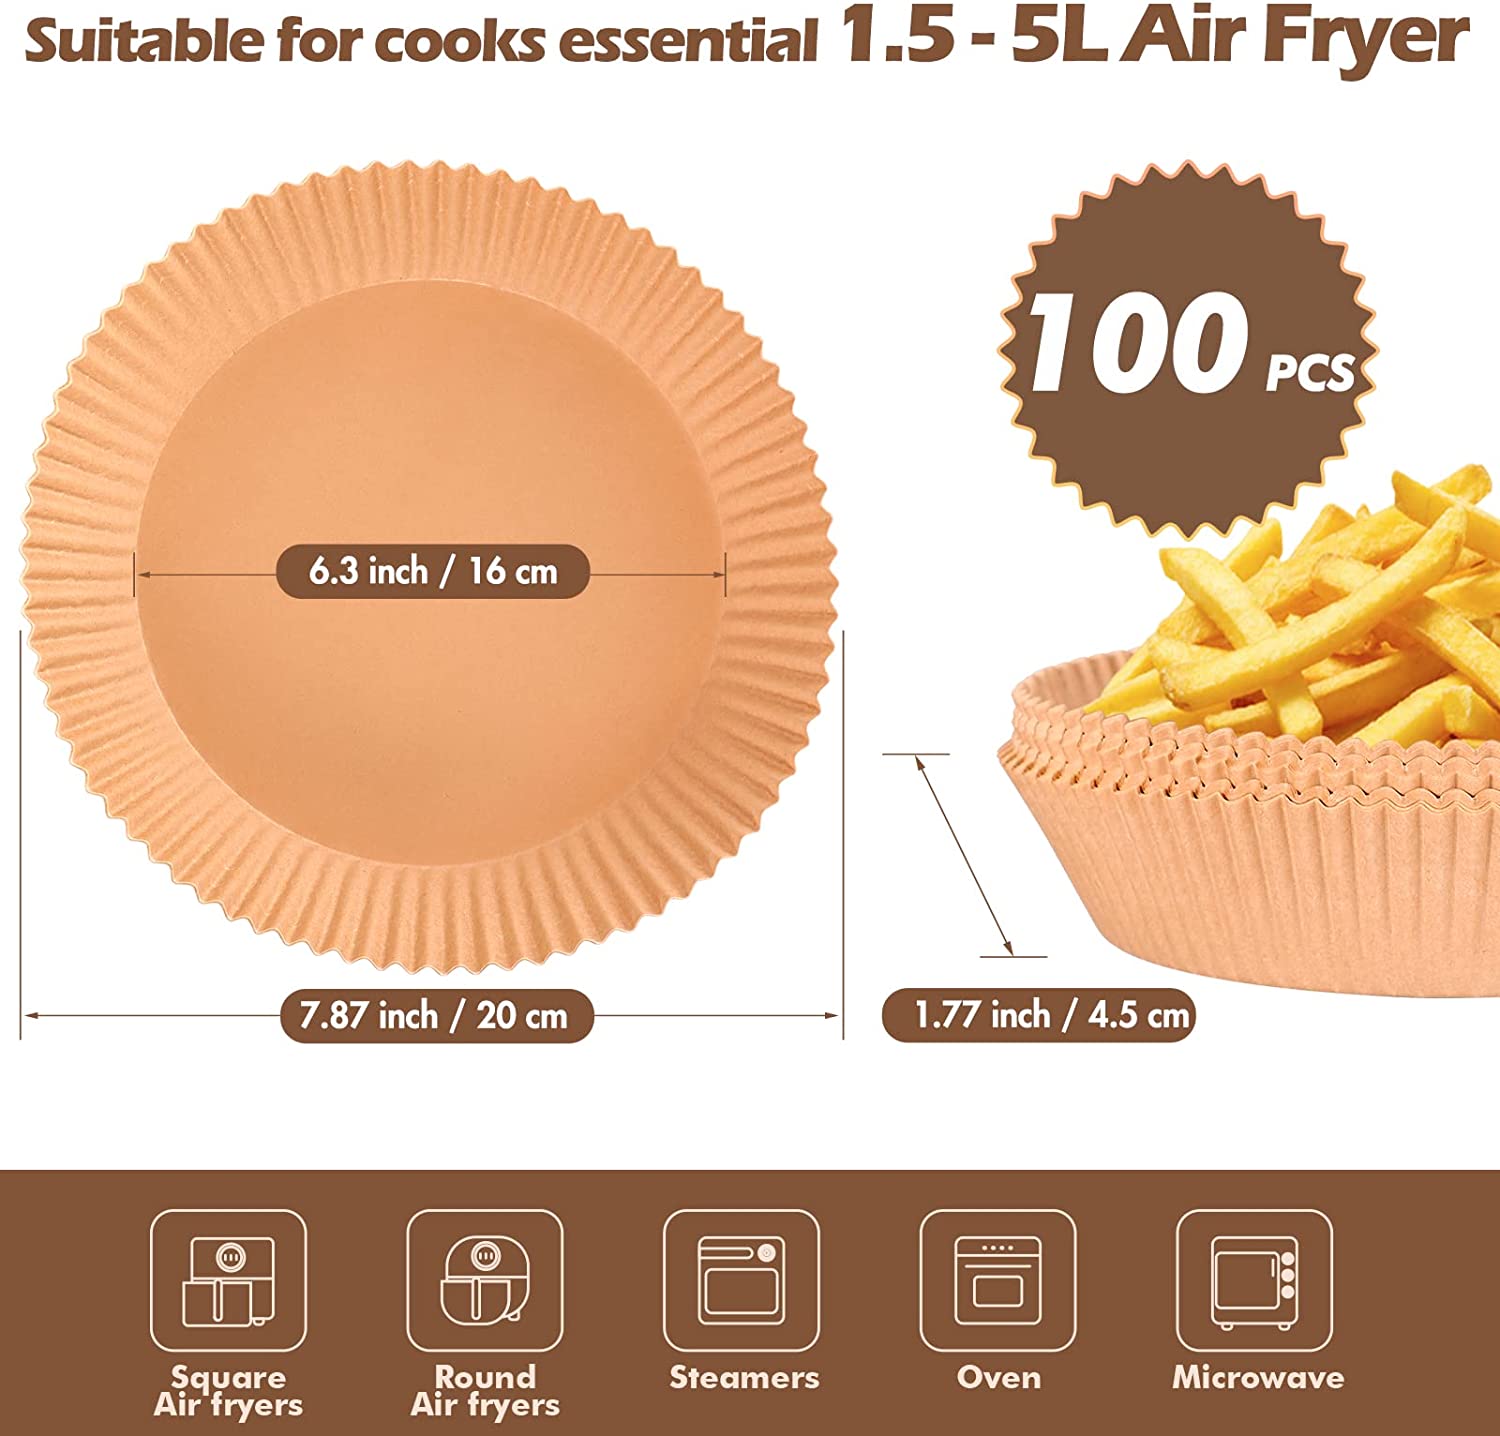 Air Fryer Disposable Paper Liners - 100PCS 8 Inch Square Food